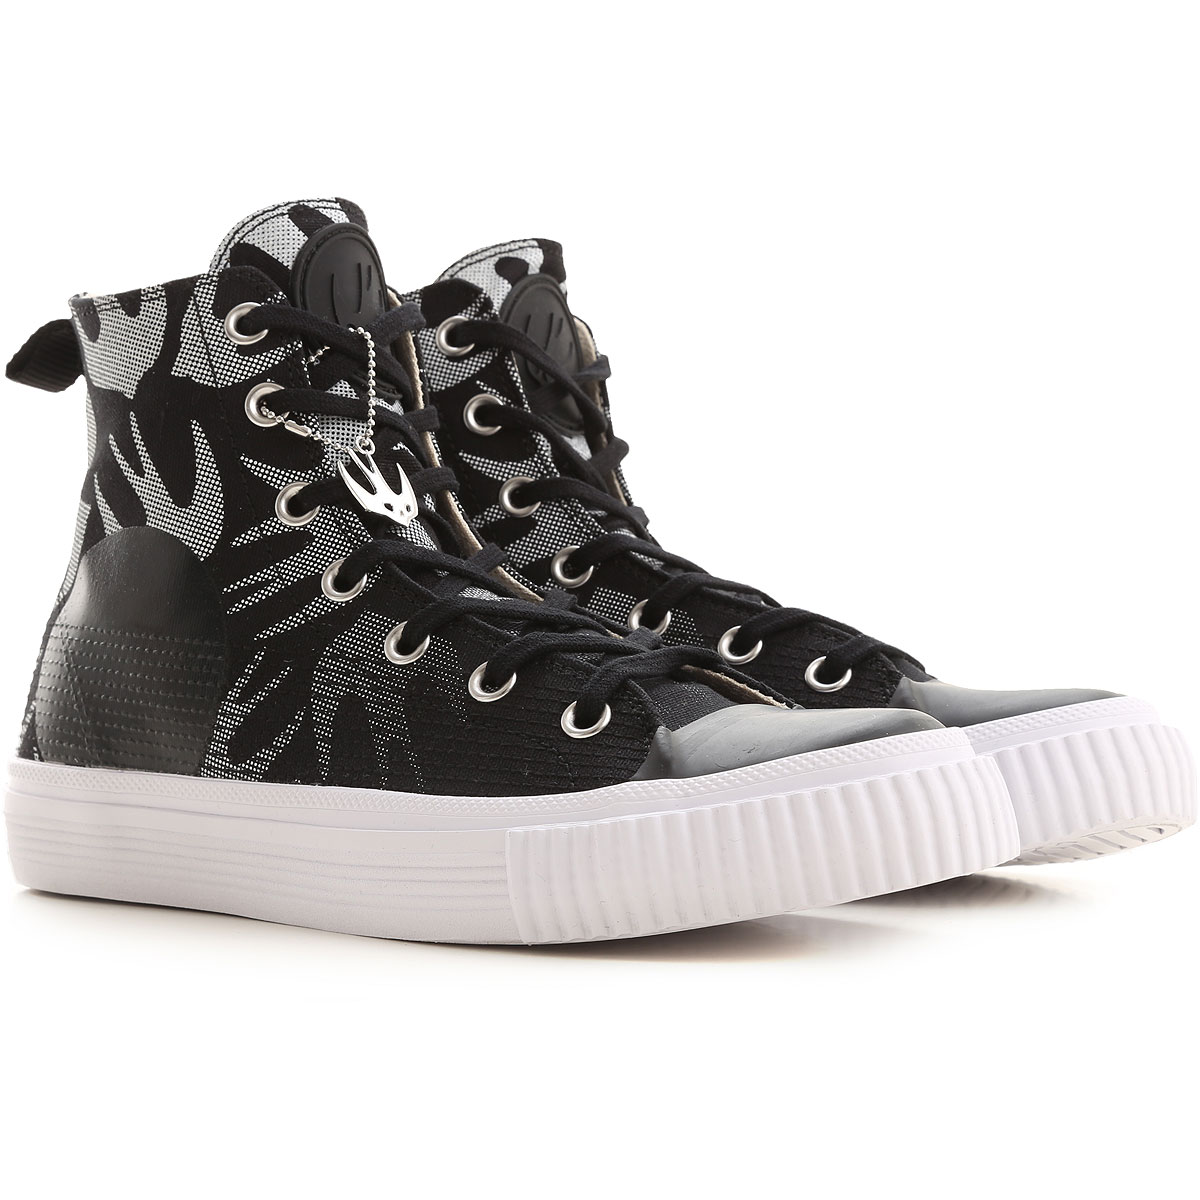 Womens Shoes Alexander McQueen McQ, Style code: 600321-r2682-1006